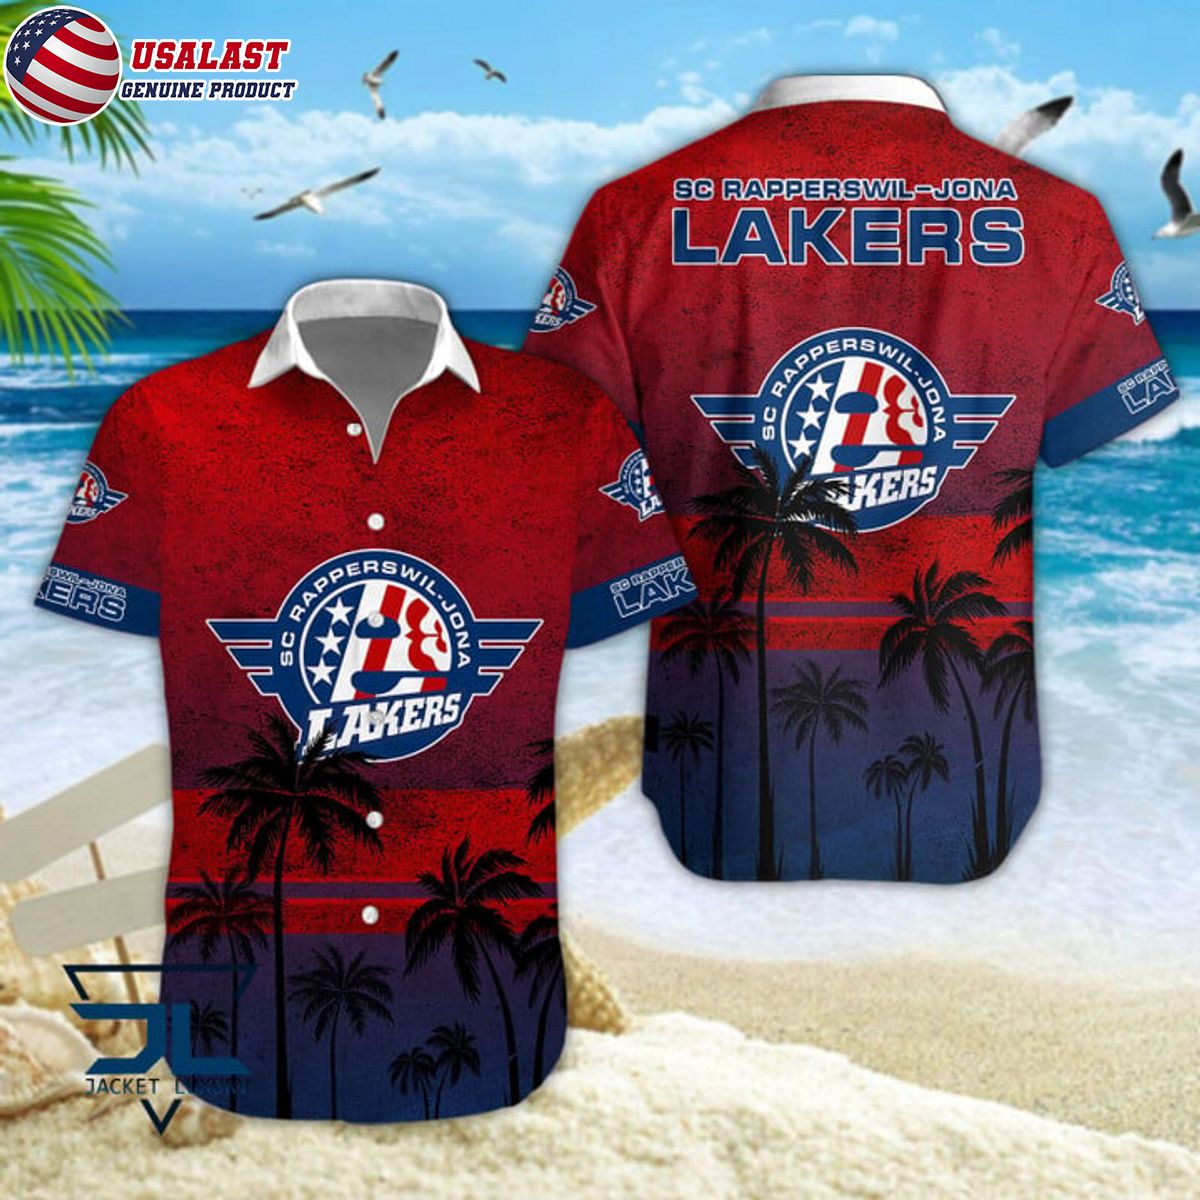 SC Rapperswil Jona Lakers National League Coconut Tree Hawaiian Shirt

The HCB Ticino Rockets National League Coconut Tree Hawaiian Shirt effortlessly combines style and team spirit in one unforgettable piece

https://t.co/qOfX1ZQpjw https://t.co/P3t8YdB1Mc